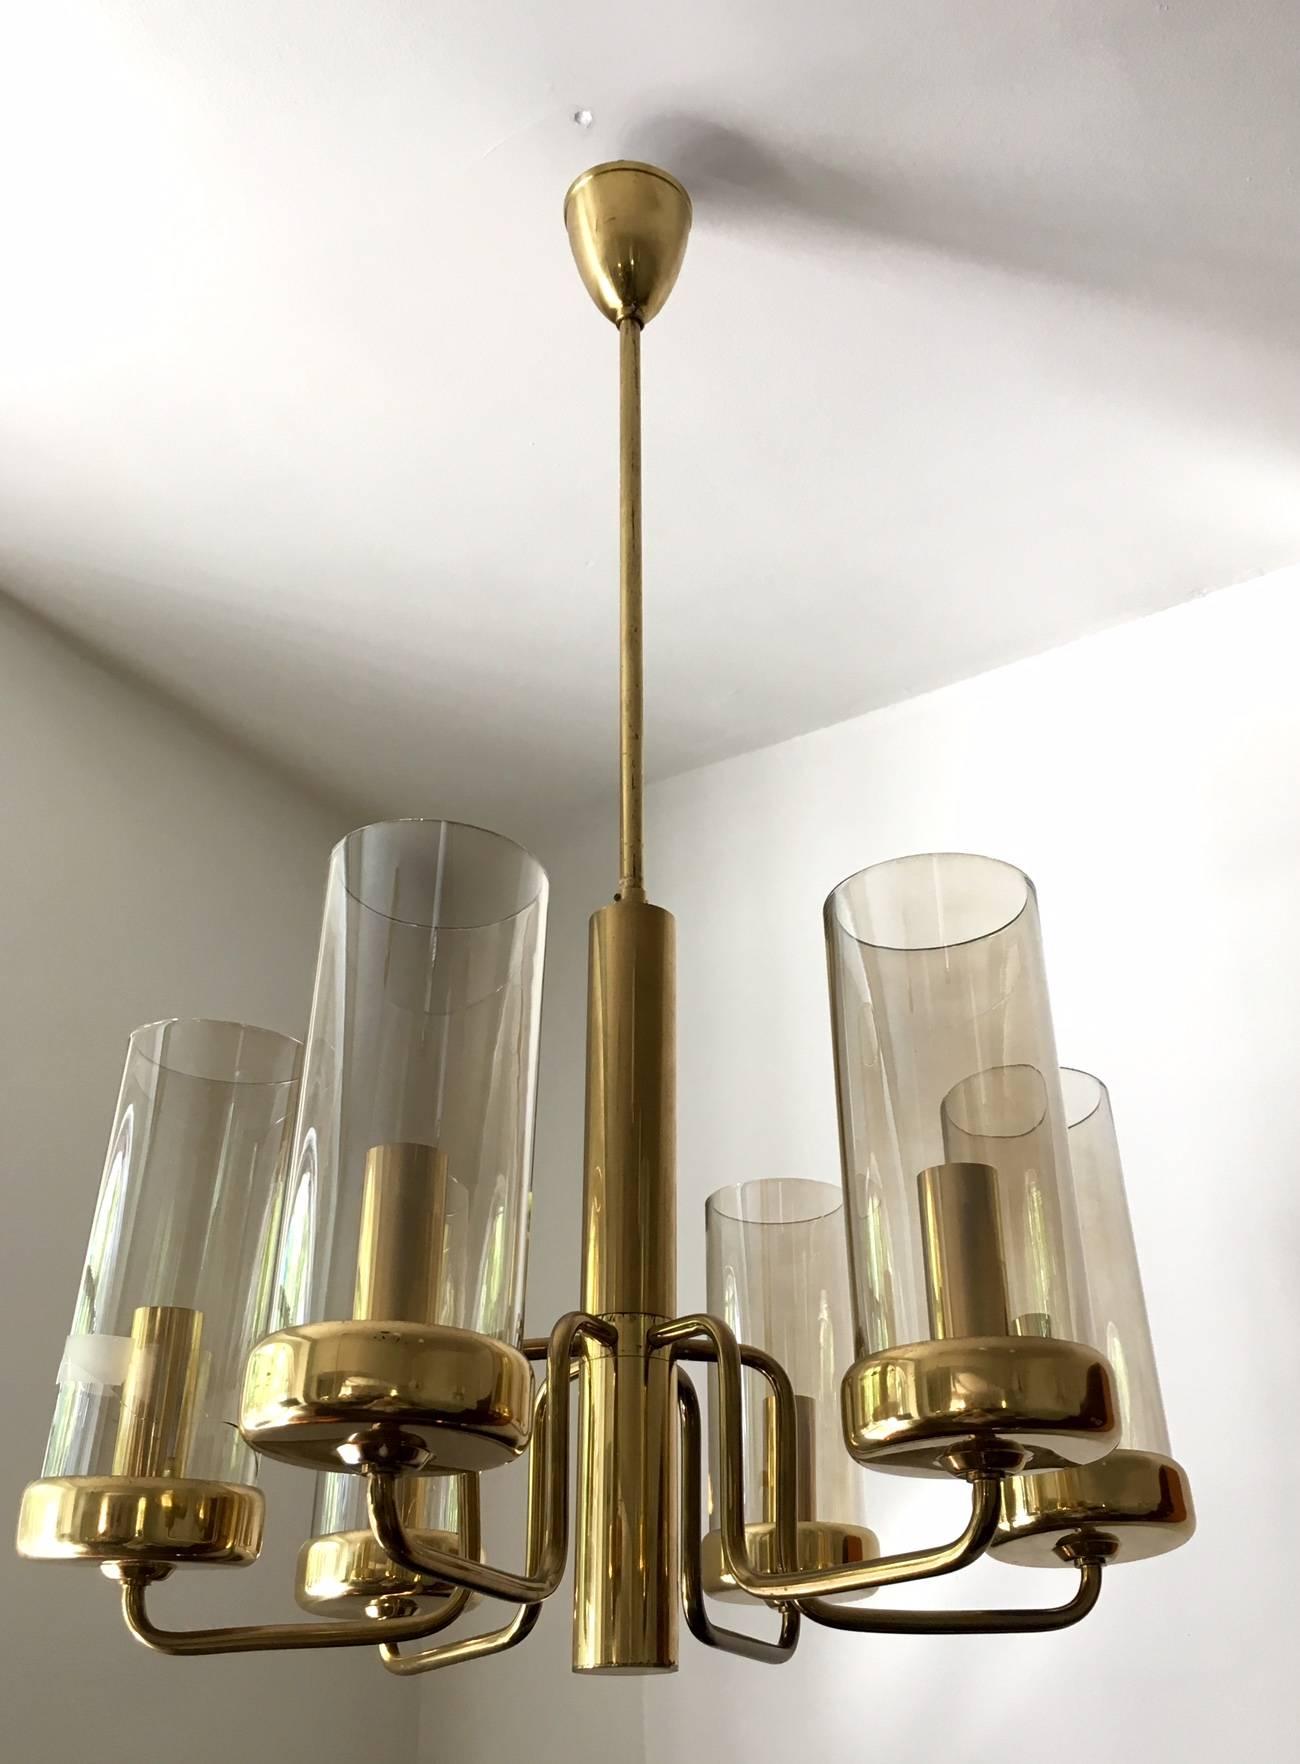 Beautiful brass ceiling lamp with six-light arms. Cylindrical slightly tinted glass globes. Please note that one glass cylinder has a crack. In the style of Hans-Agne Jakobsson.